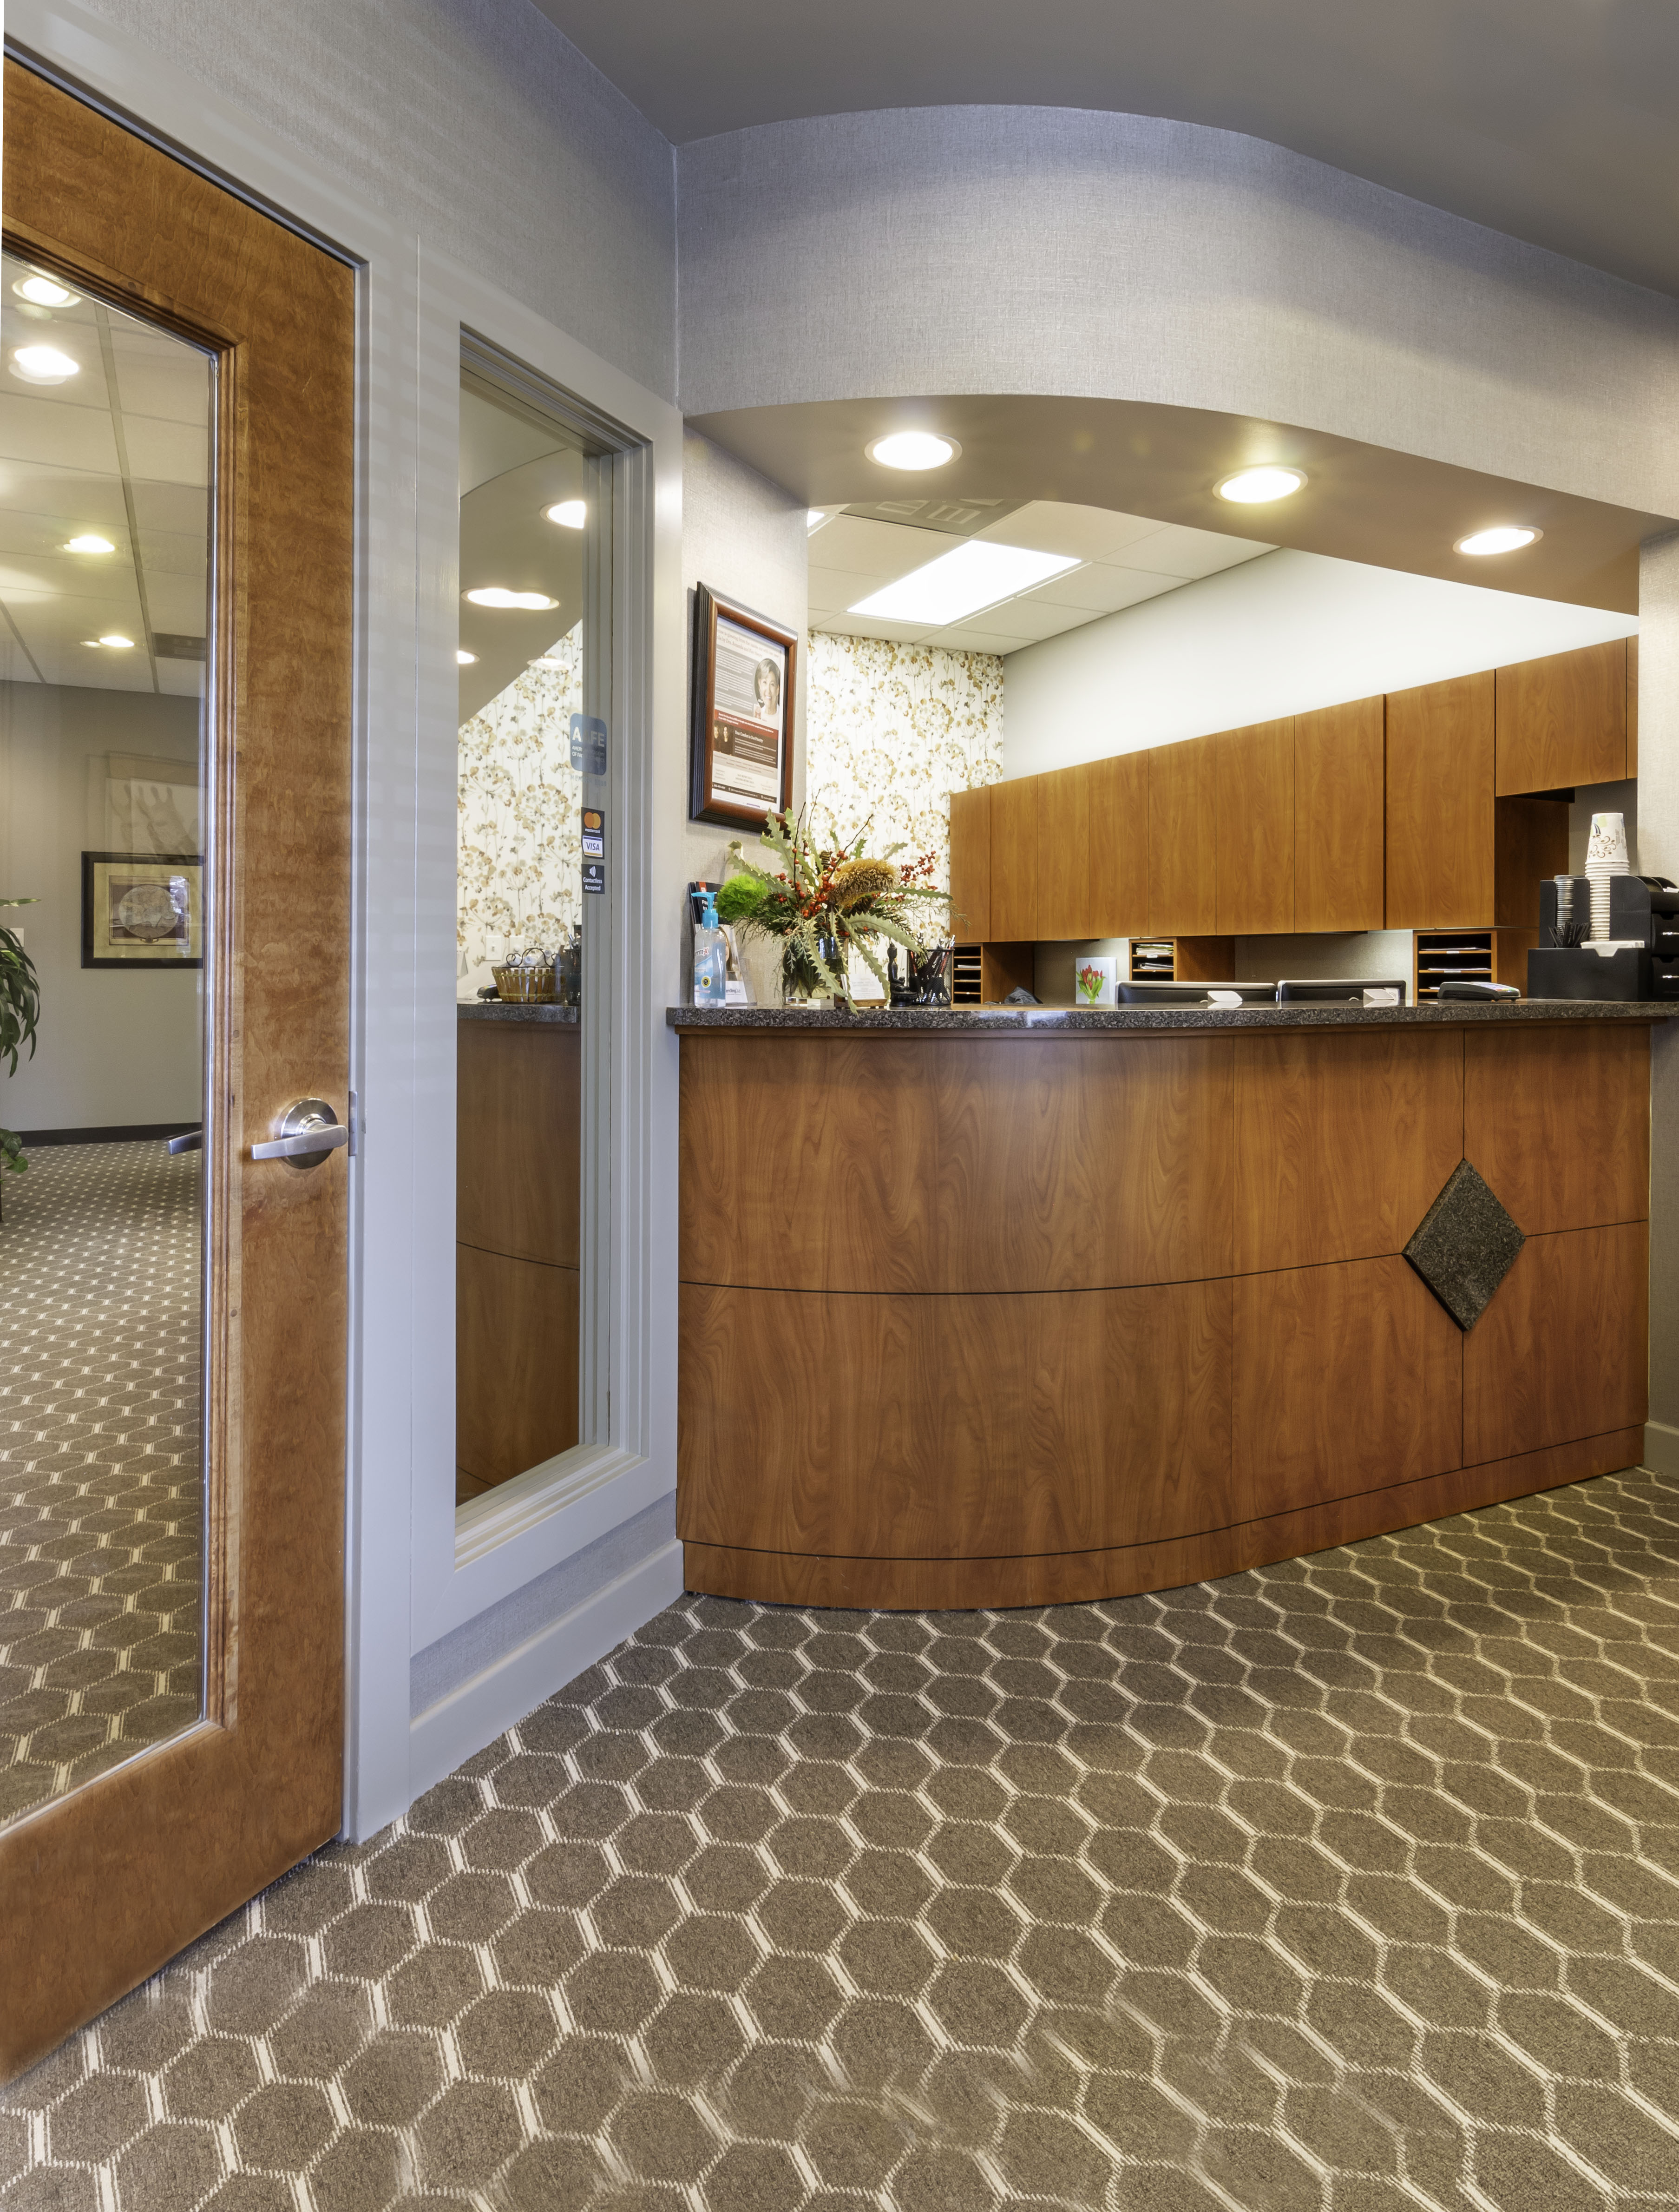 Reception area of dentist office with wood counter and tan patterned carpet